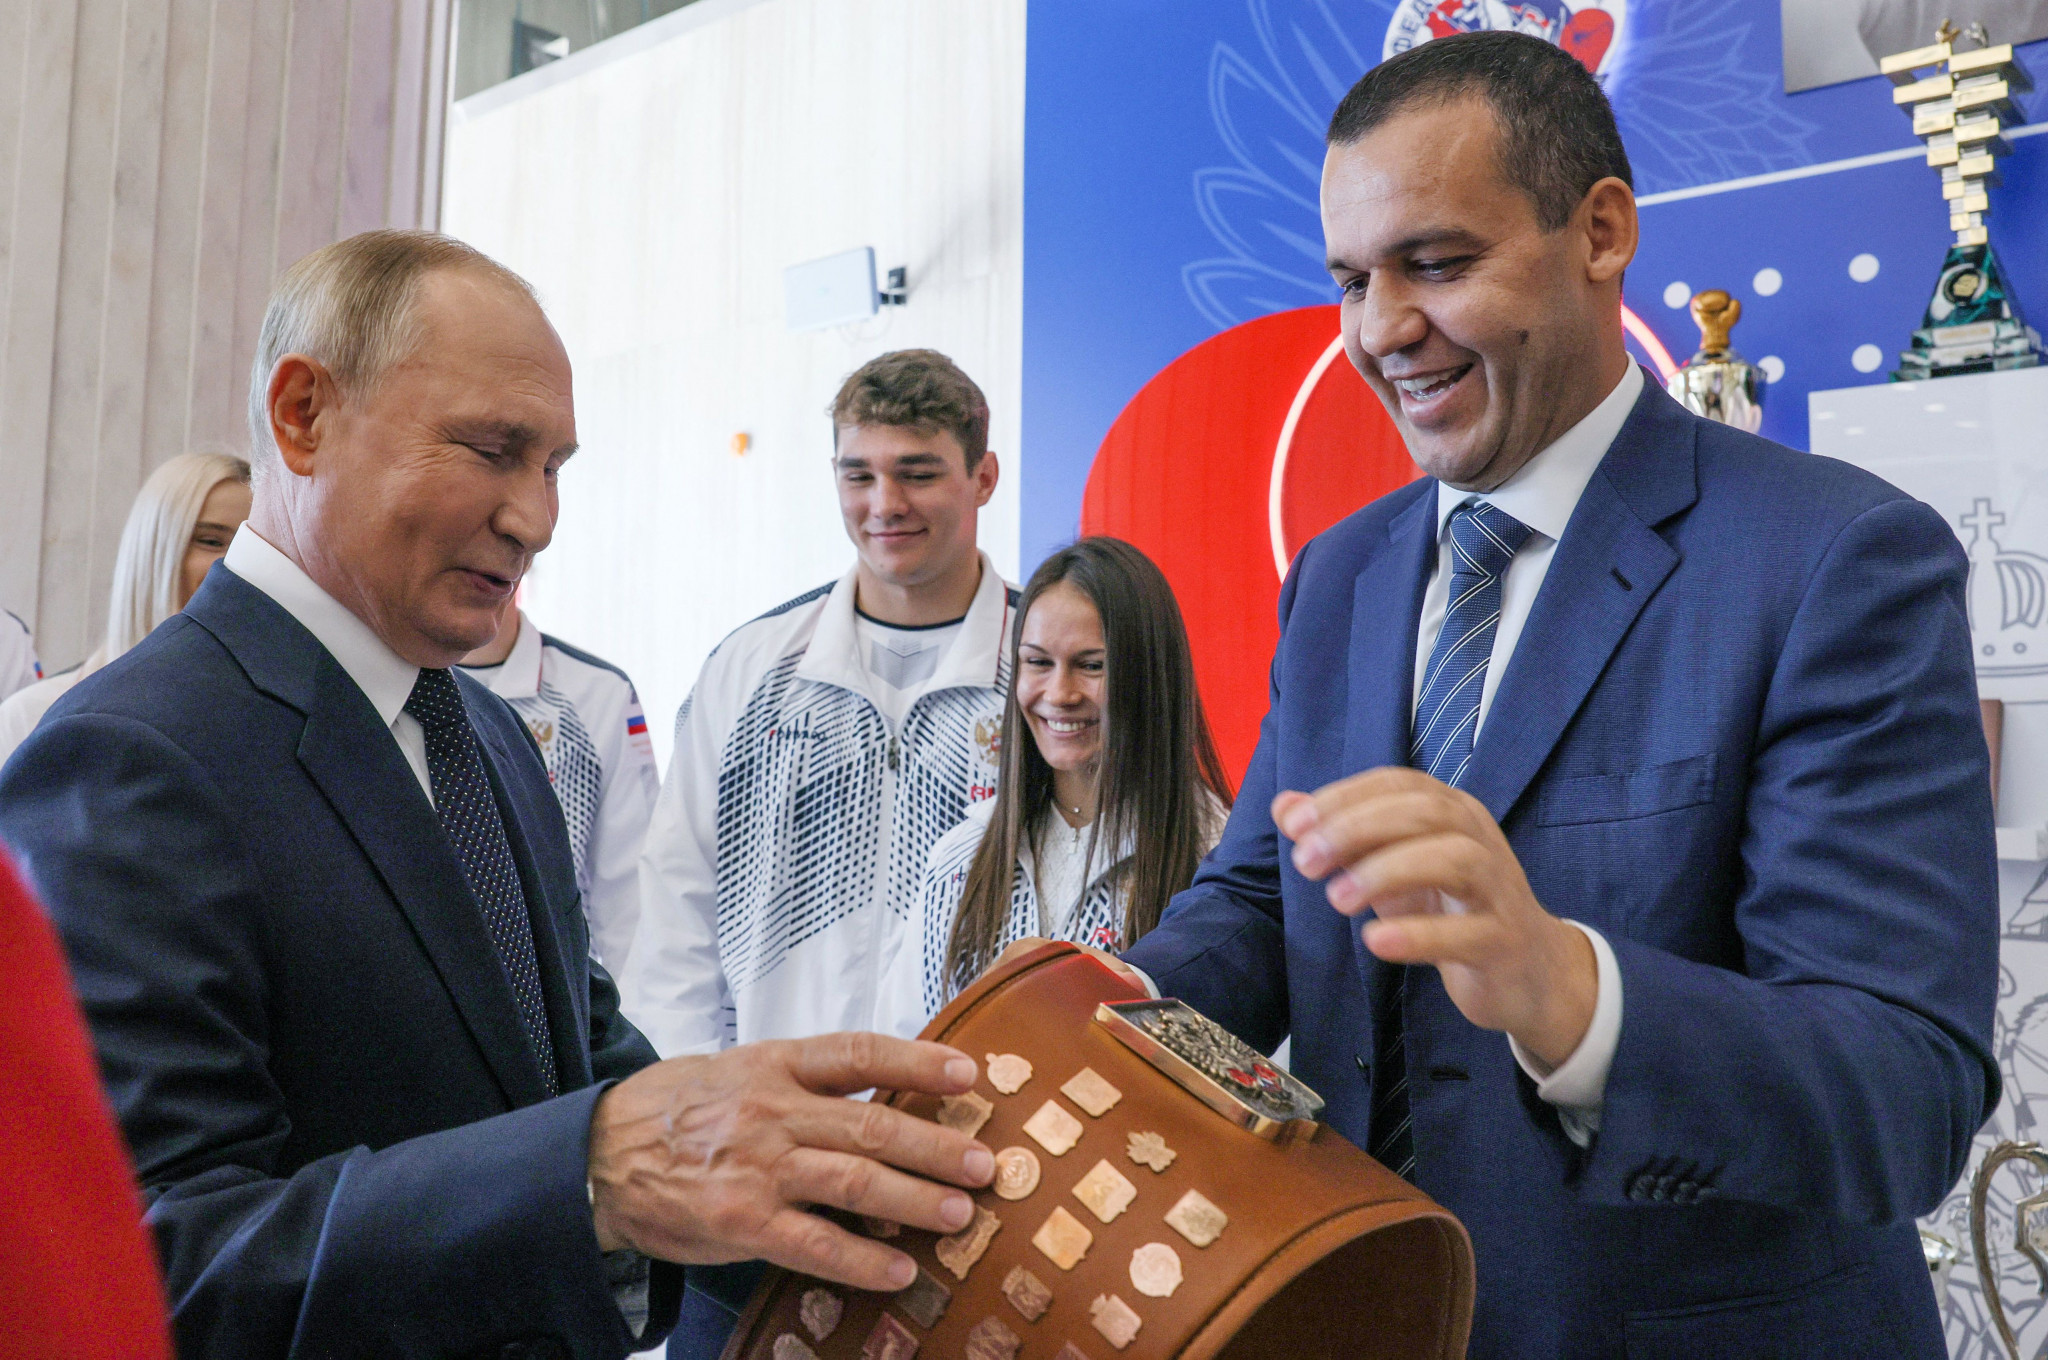 IBA head Kremlev meets with Russian President Putin for opening of boxing centre